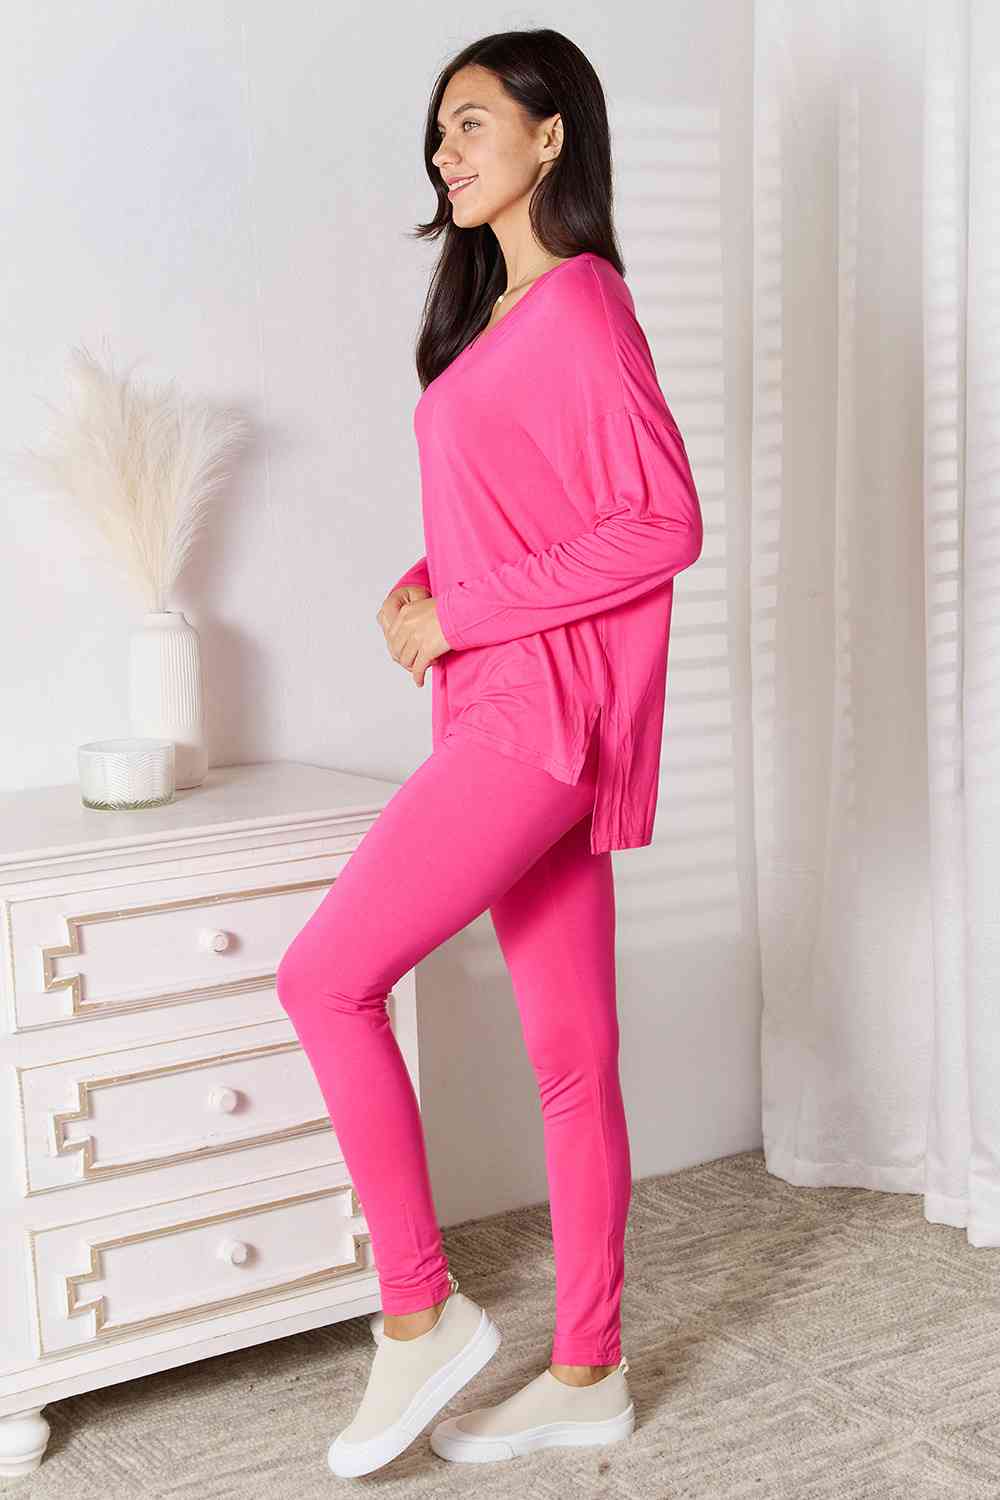 Breakfast In Bed Top and Pants Lounge Set